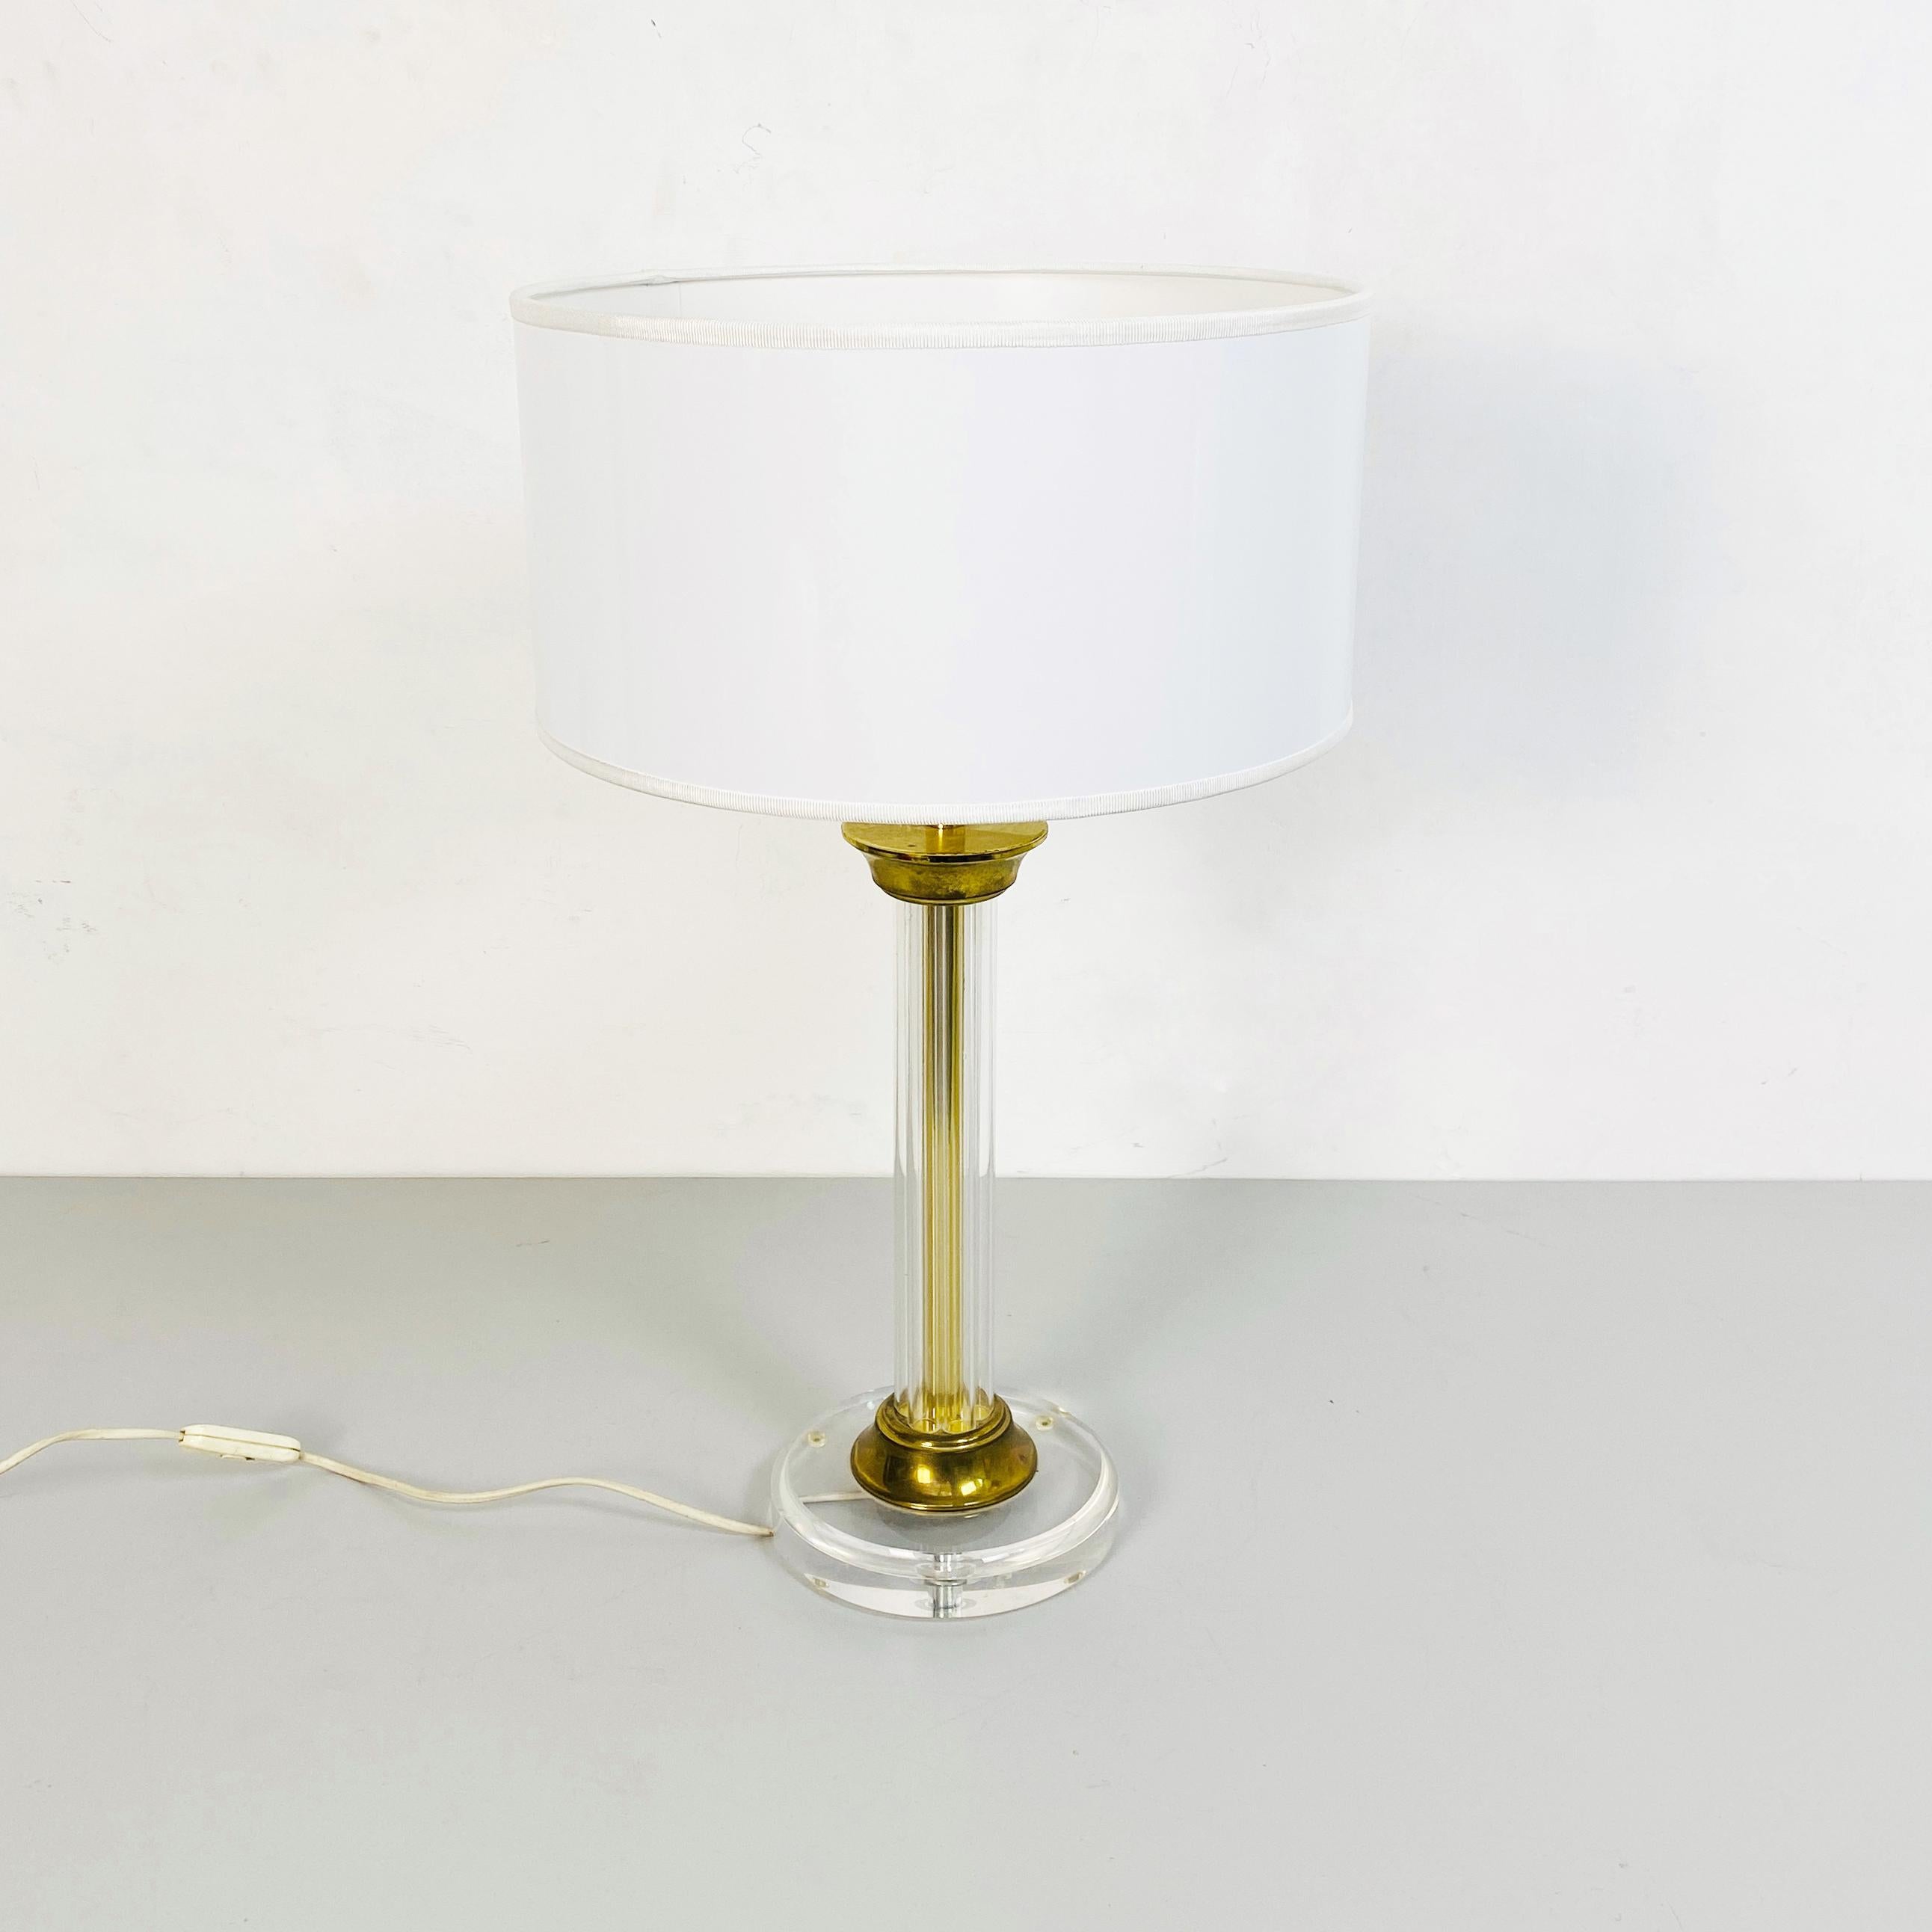 Italian mid-century column-shaped plexiglass and brass table lamp, 1970s
Column-shaped table lamp in transparent plexiglass with brass details, new glossy white lampshade.
1970s
Good conditions.
Measure in cm 36 x 60 H.